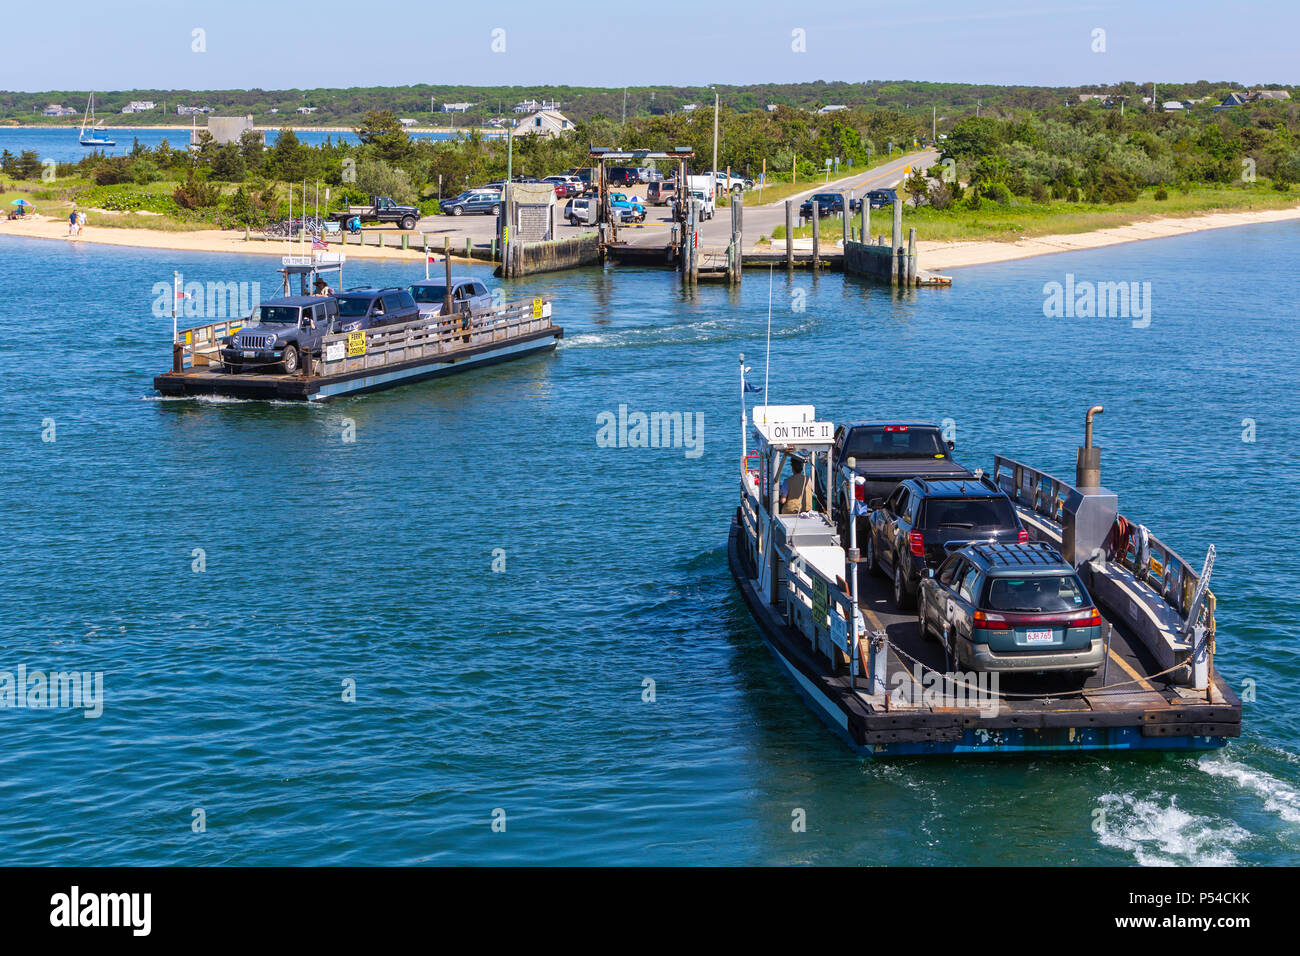 Two Chappy Ferries pass each other crossing the harbor between Chappaquiddick Island and downtown Edgartown, Massachusetts on Martha's Vineyard. Stock Photo